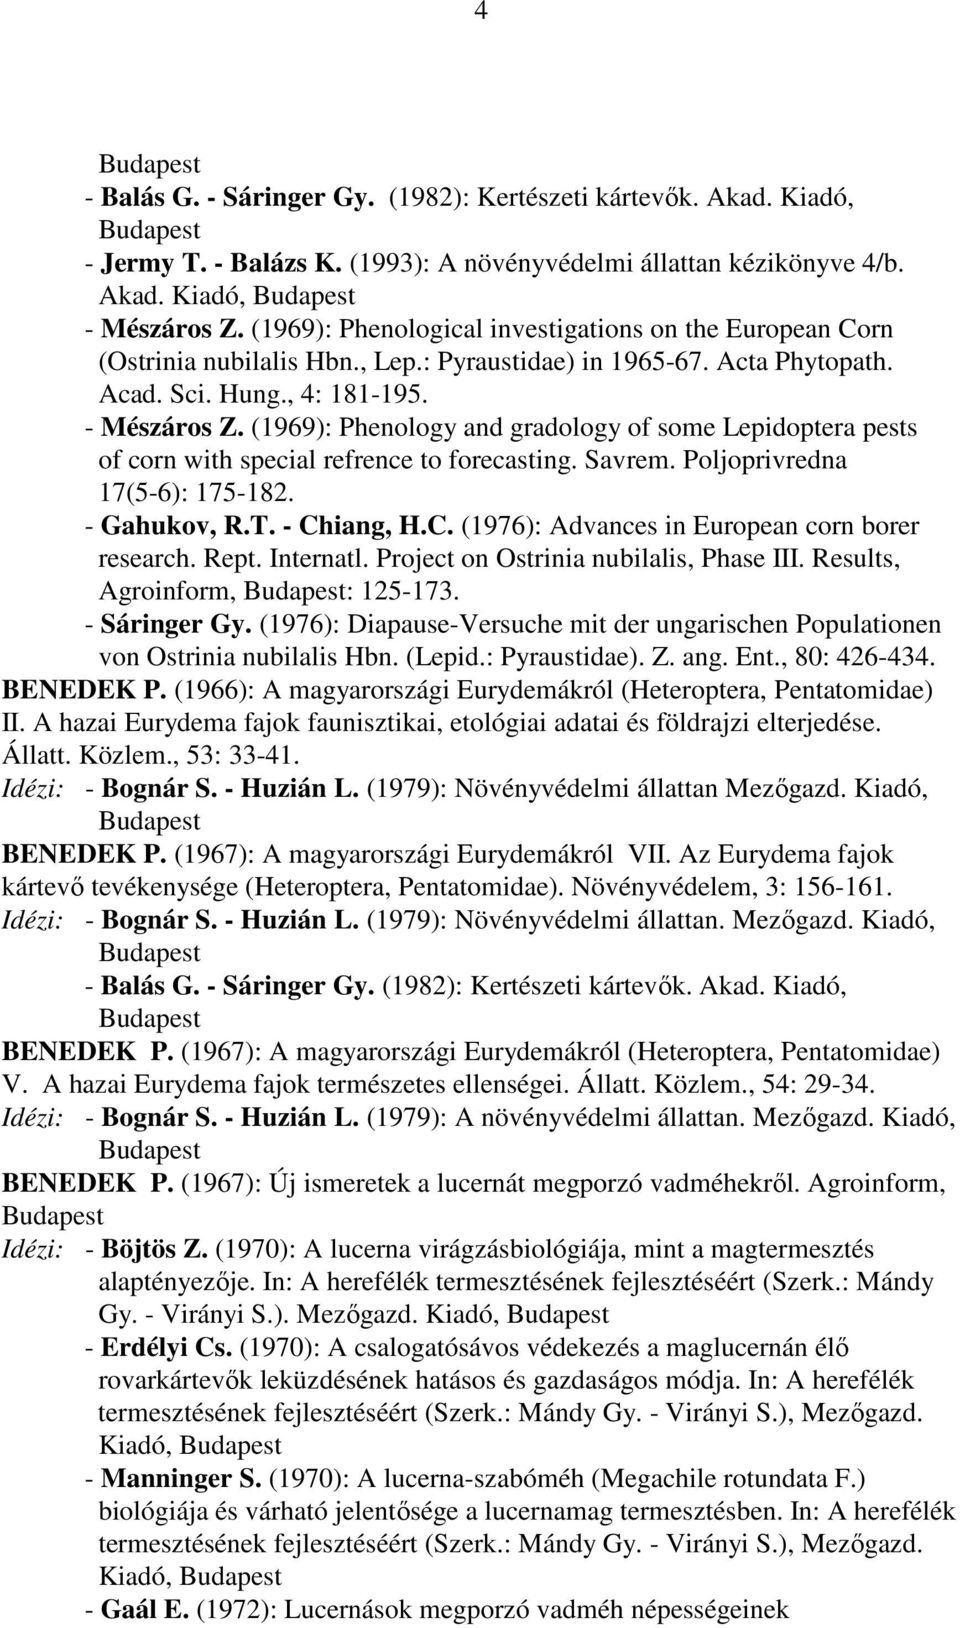 (1969): Phenology and gradology of some Lepidoptera pests of corn with special refrence to forecasting. Savrem. Poljoprivredna 17(5-6): 175-182. - Gahukov, R.T. - Ch